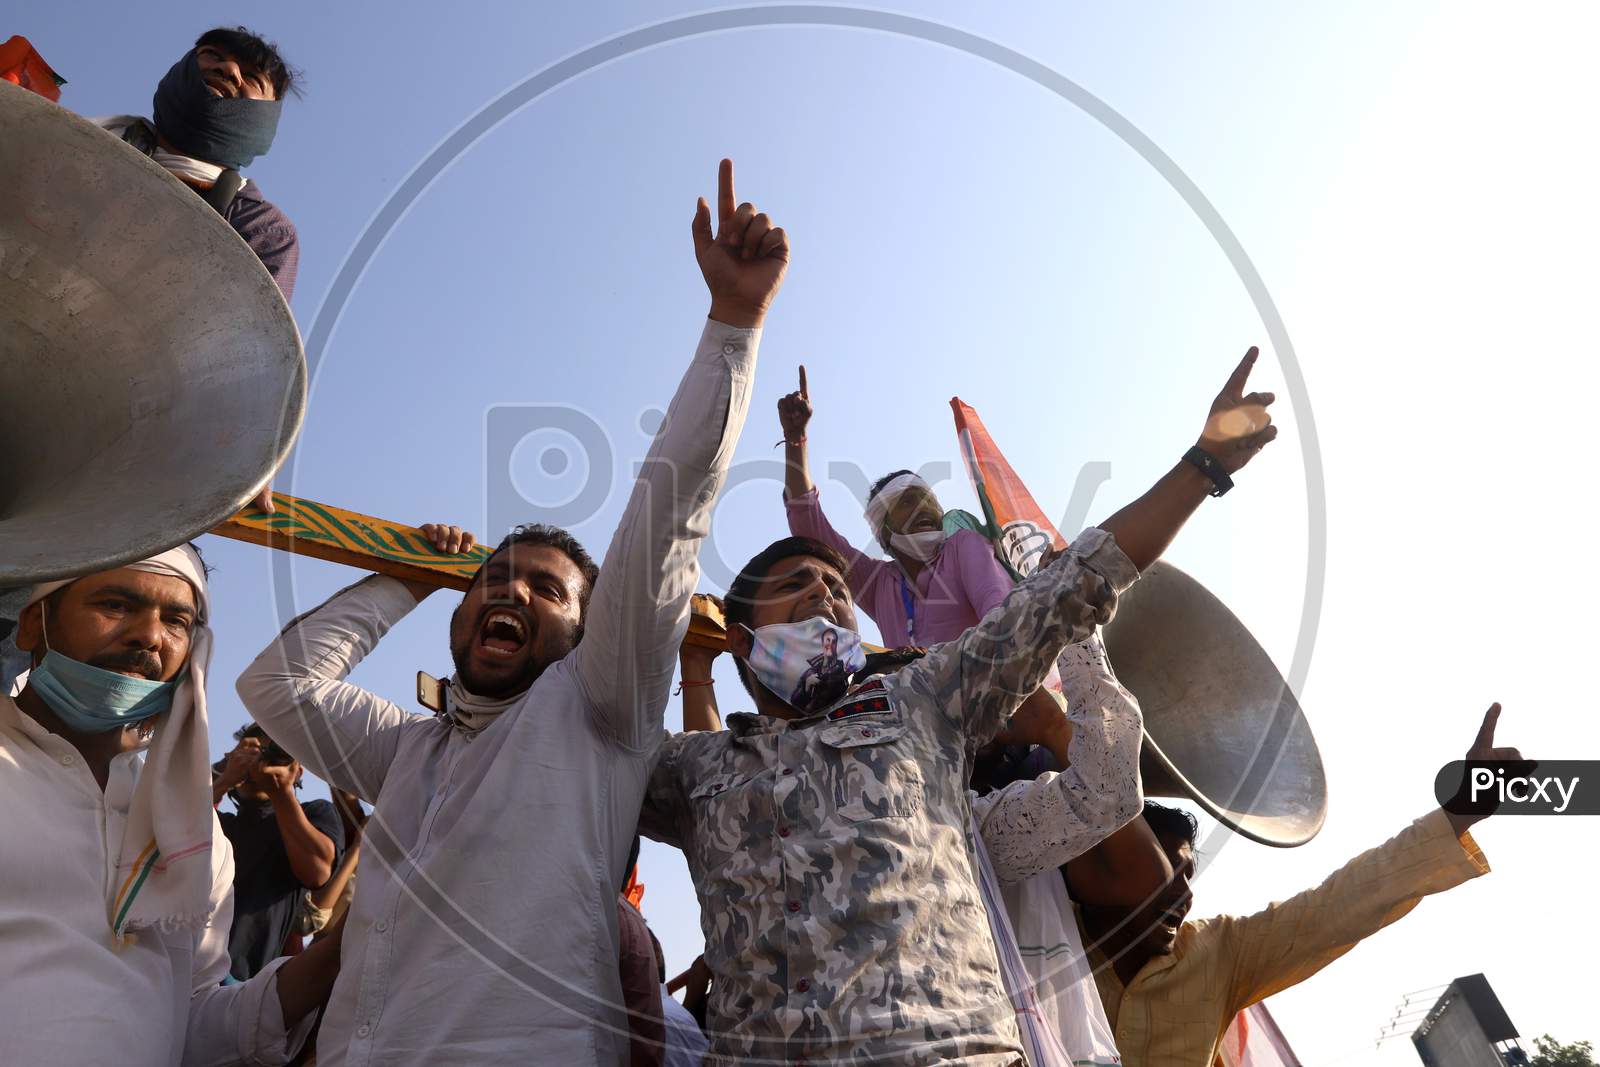 Congress party workers protest at Delhi-Noida border during a protest after the death of a rape victim, in Noida, India, October 3, 2020.